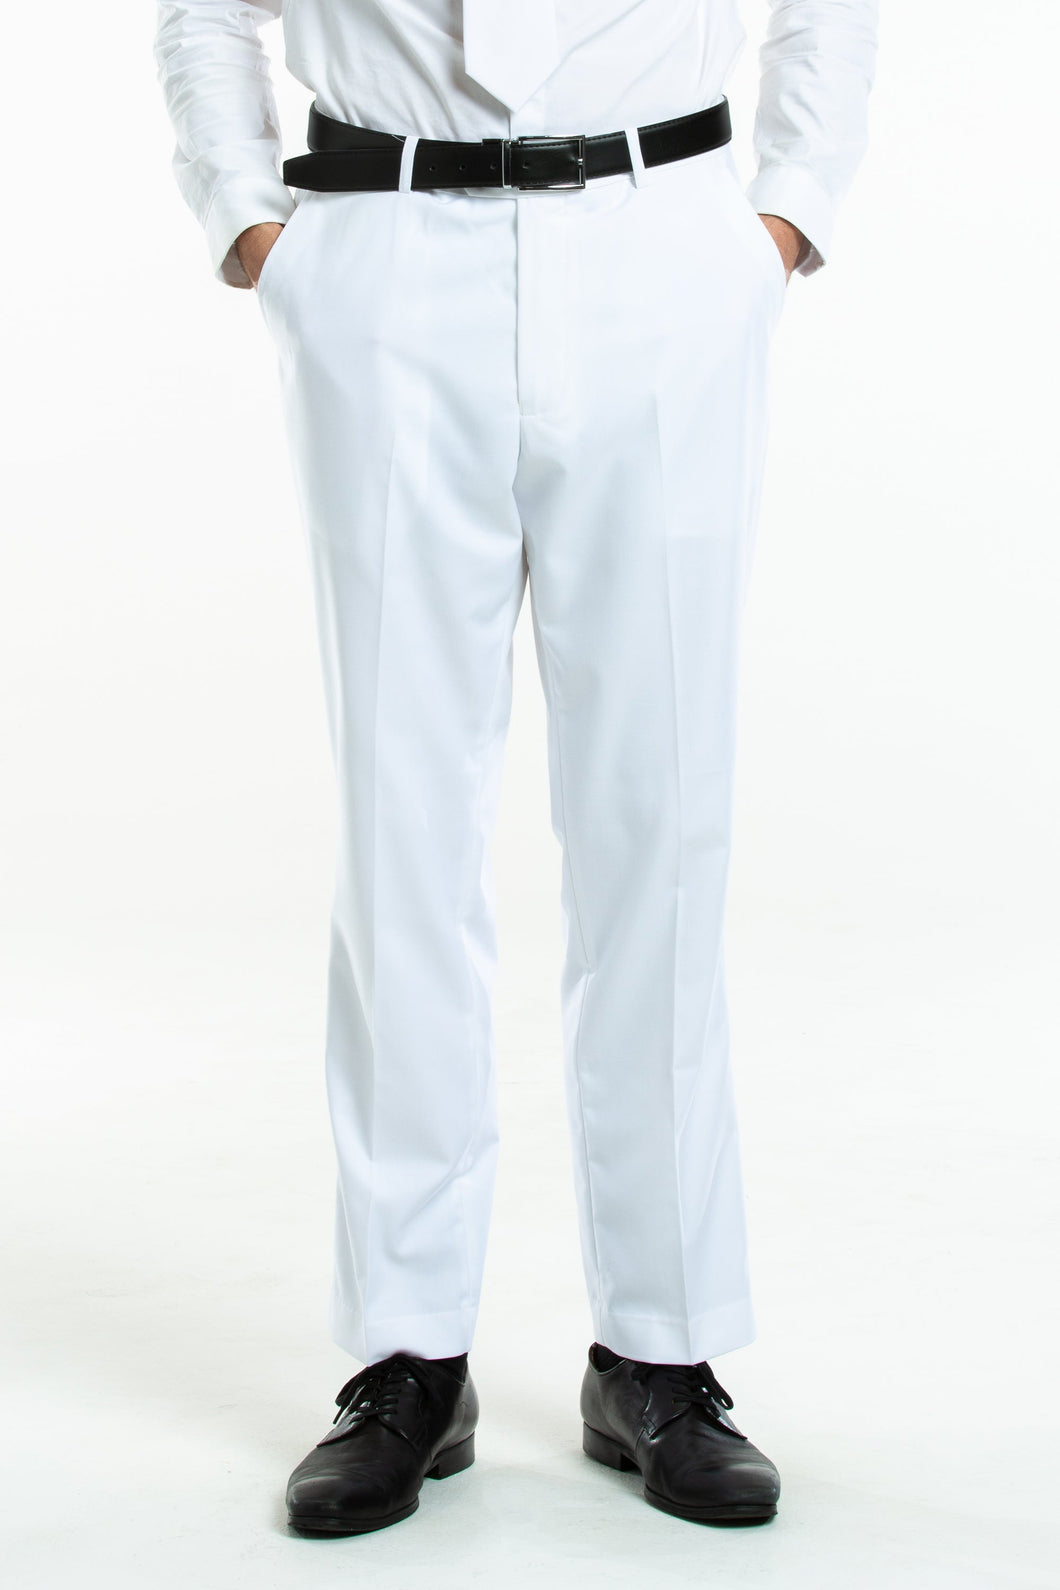 The White Tiger | White Suit Pants